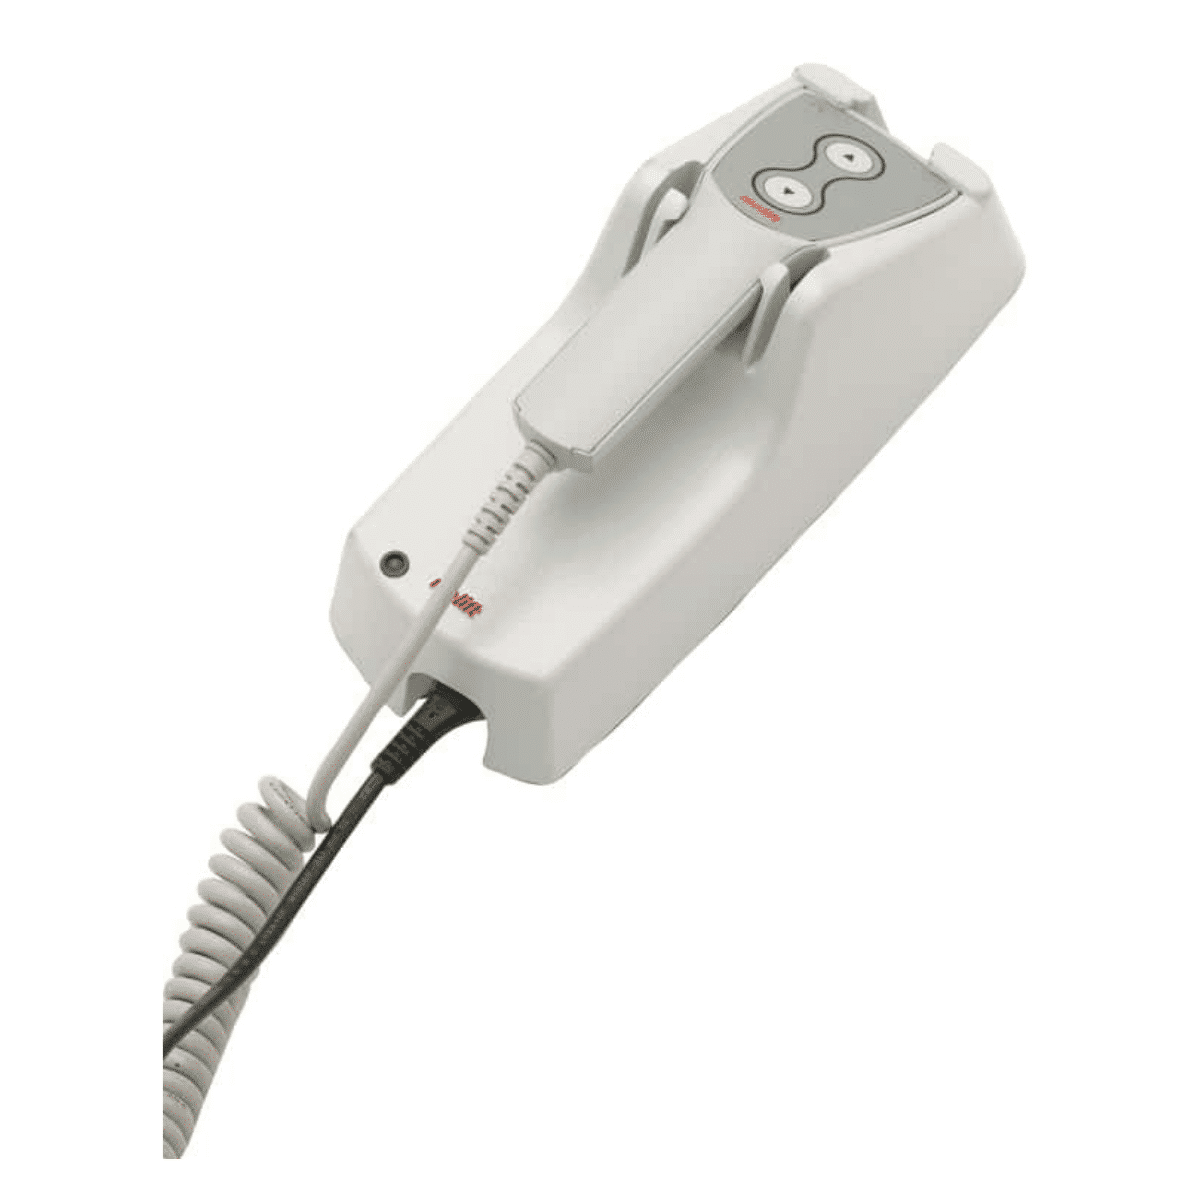 Molift Charger for Nomad and Air Ceiling Hoists